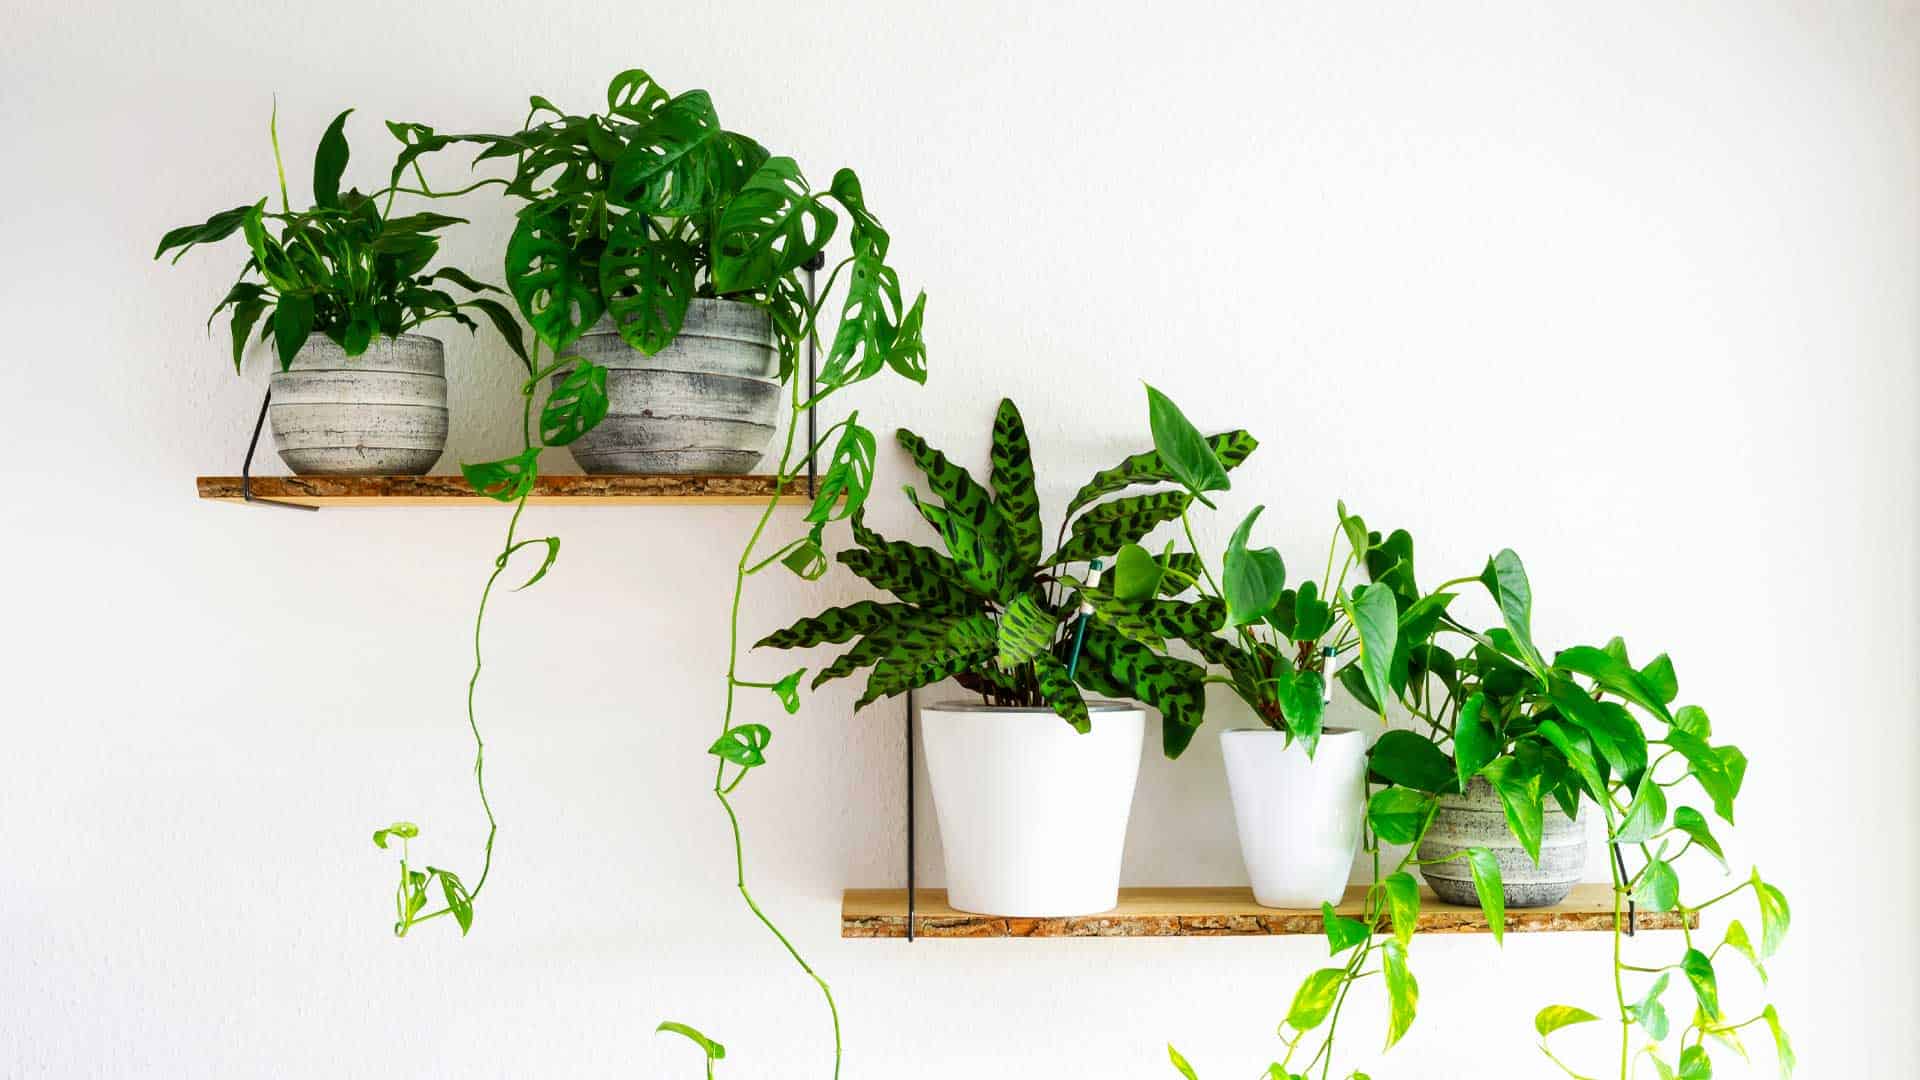 How to showcase your indoor plants in an original and trendy way